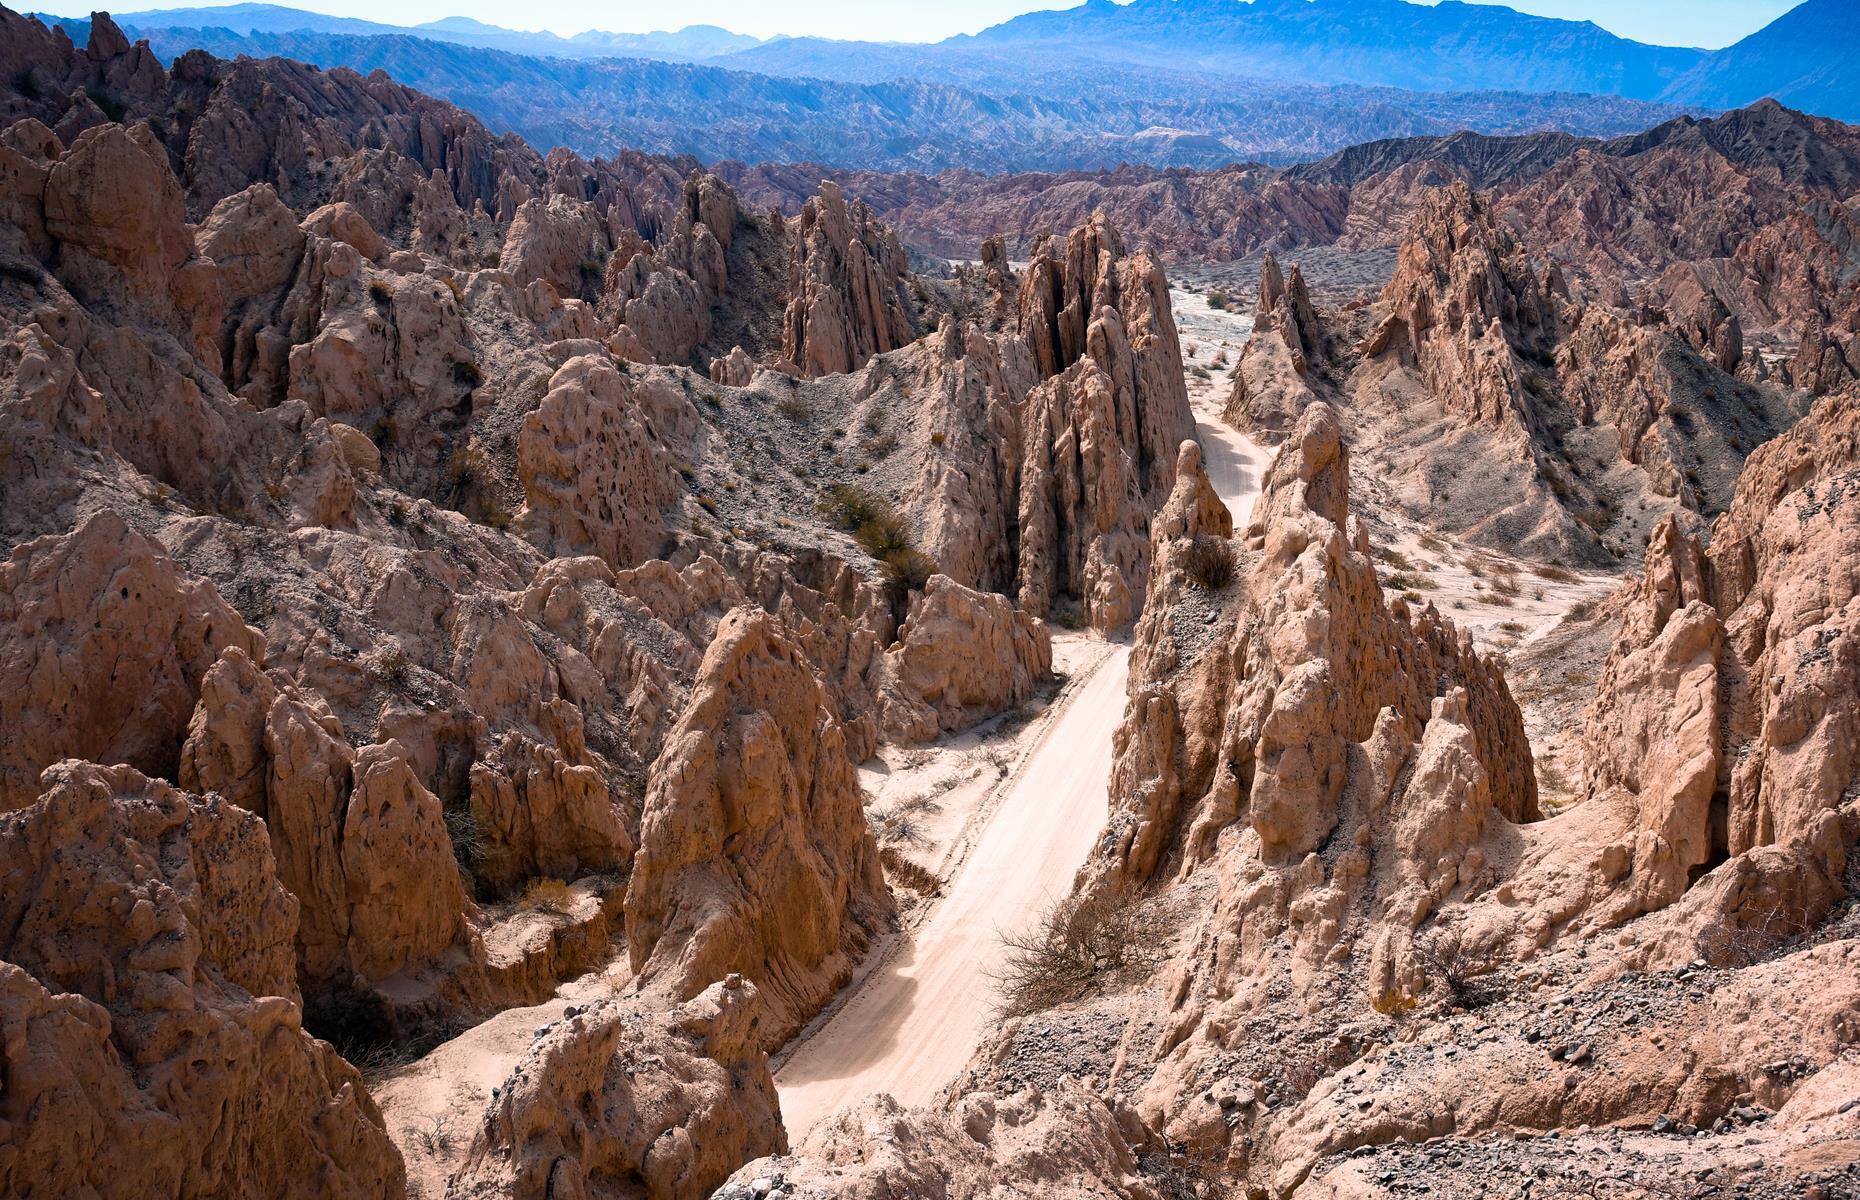 You'll pass mountains, salt flats, pampas and vineyards on Argentina's epic Route 40, which stretches 3,107 miles (5,000km) from La Quiaca in the country's northernmost province to Cabo Virgenes in the far south. In the Salta region, the highway crosses through the amazing rock formations of the Quebrada de las Flechas Canyon in the Calchaqui Valley.